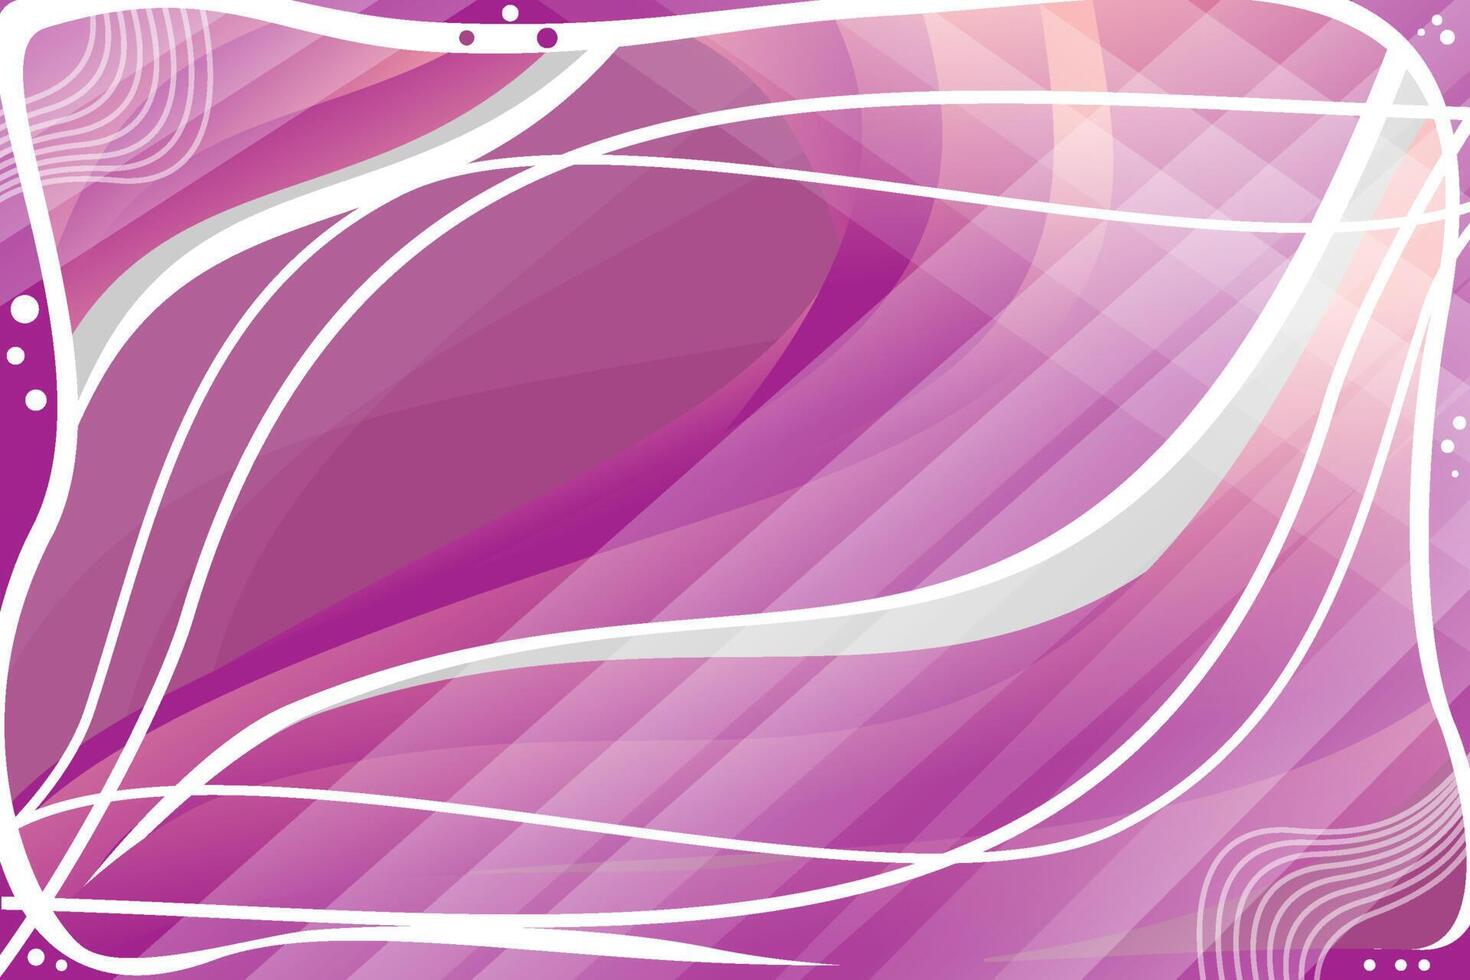 Purple gradient wave background with lines pattern and abstract objects vector